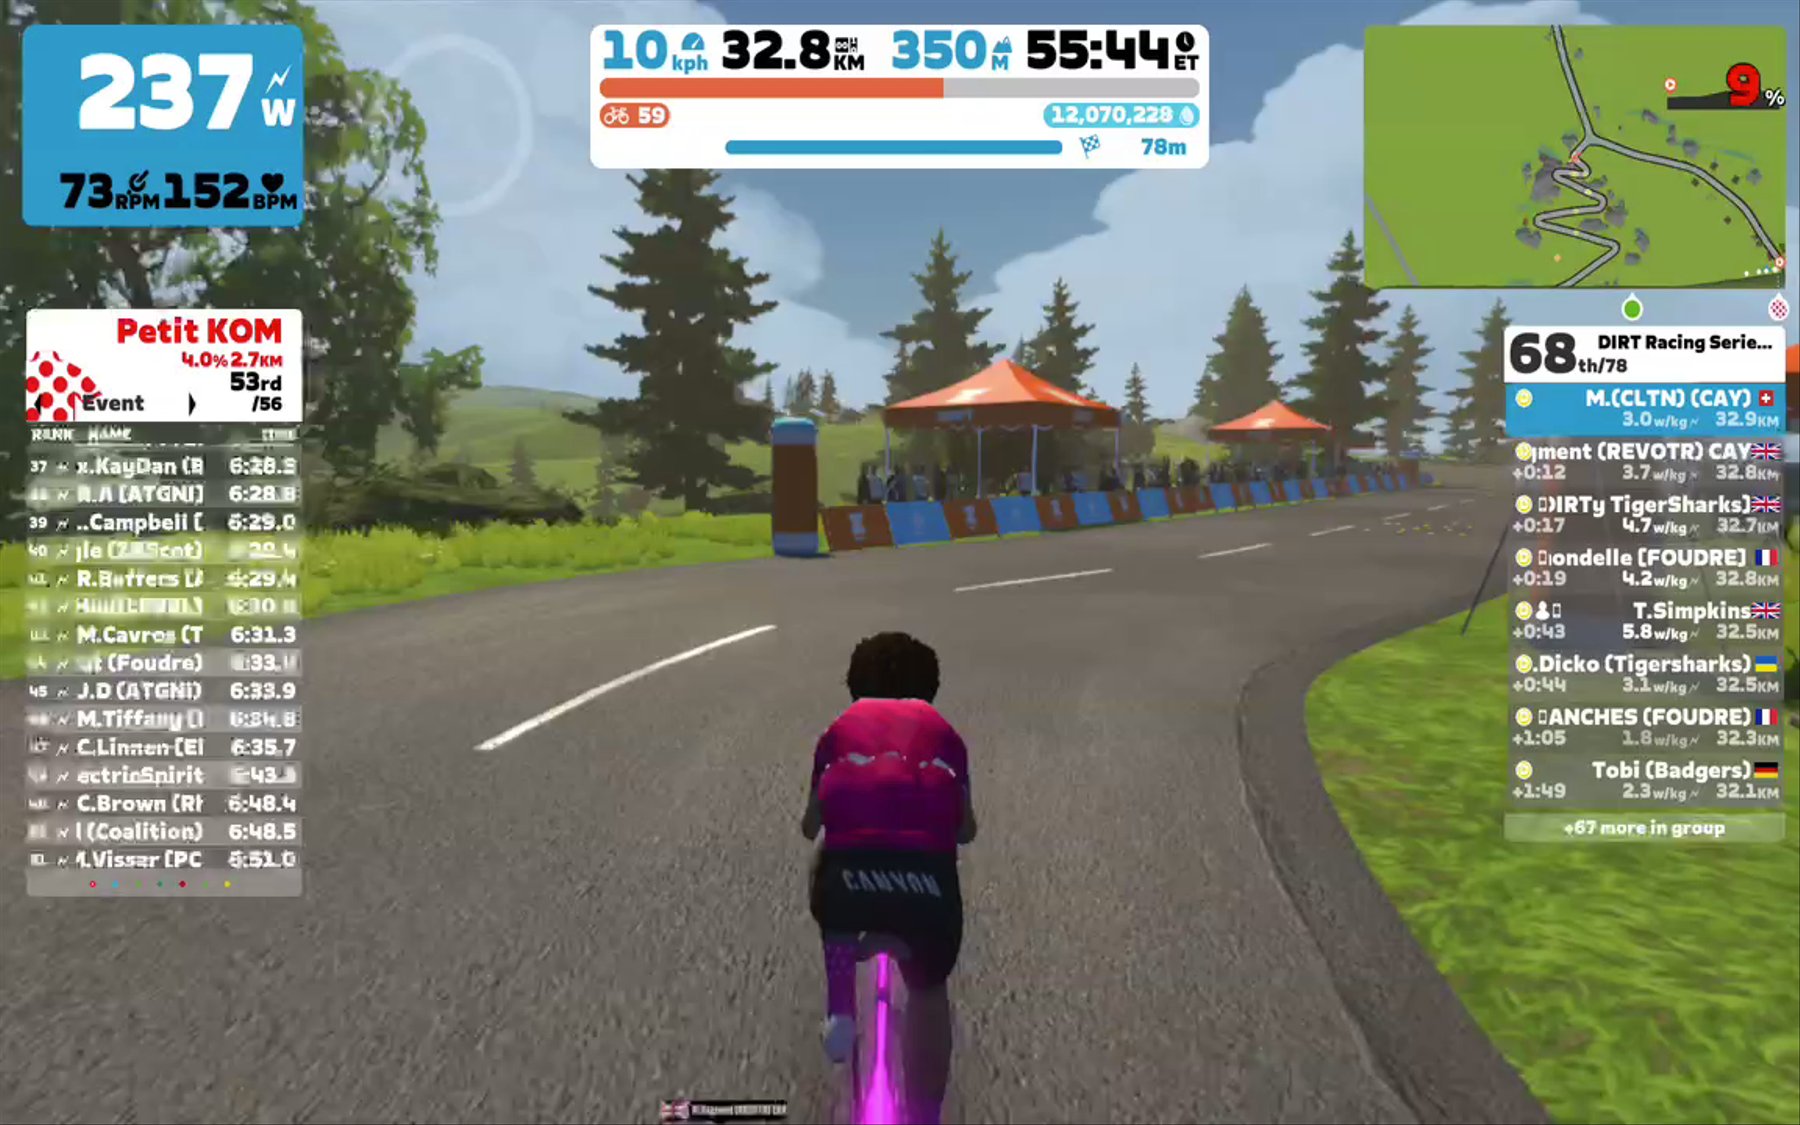 Zwift - Race: DIRT Racing Series - Rionda - Gemstones - Stage 1 (D) on Tire-Bouchon in France